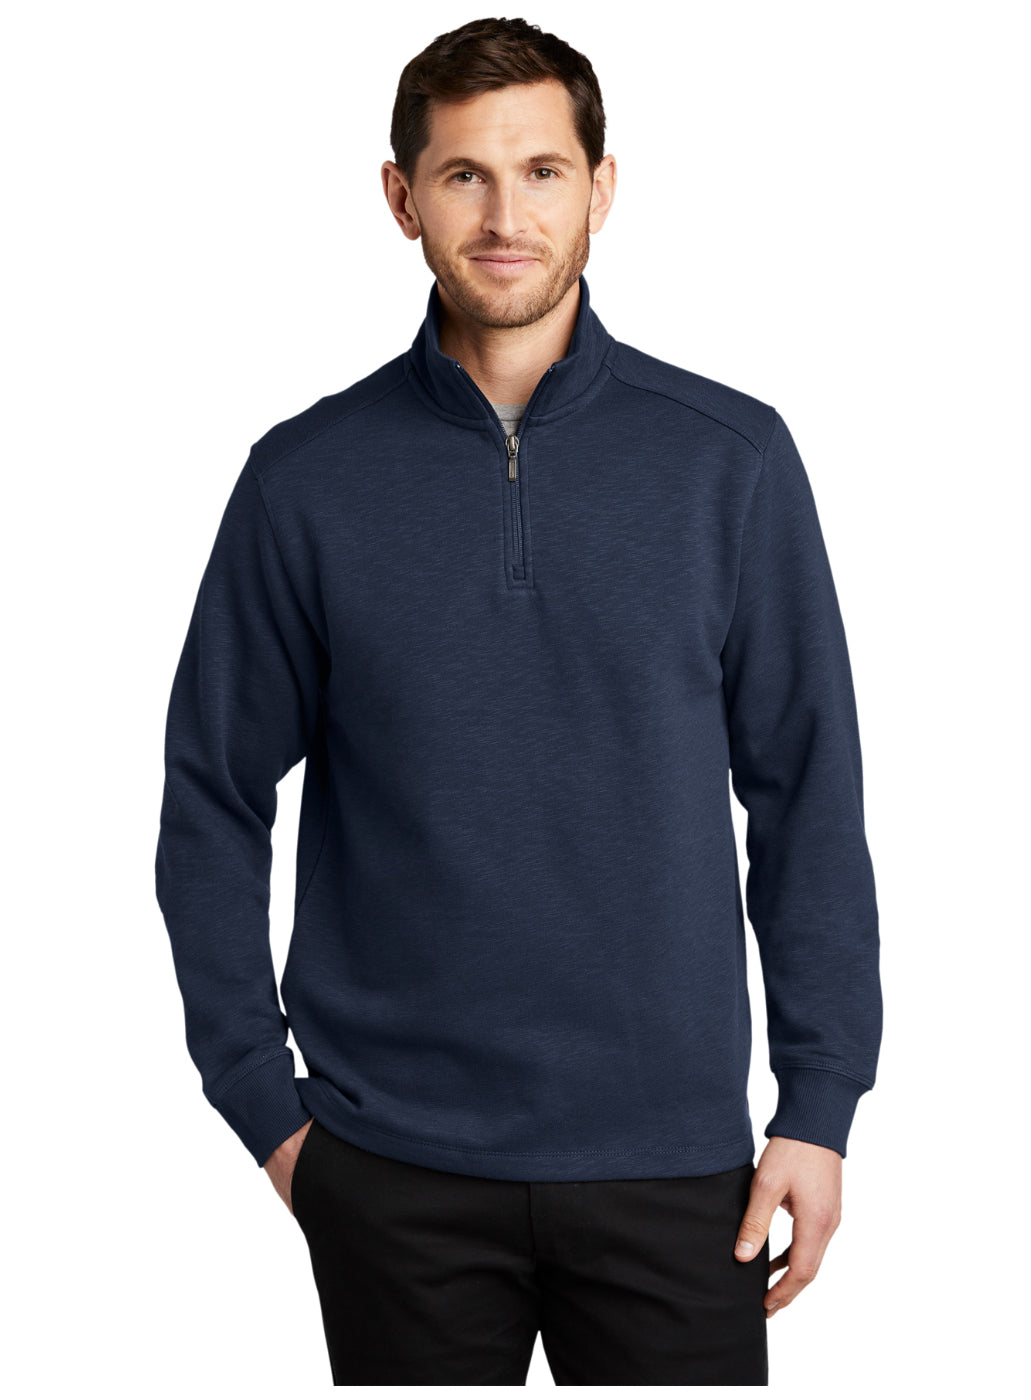 Quarter zip pullovers – Double E Creations